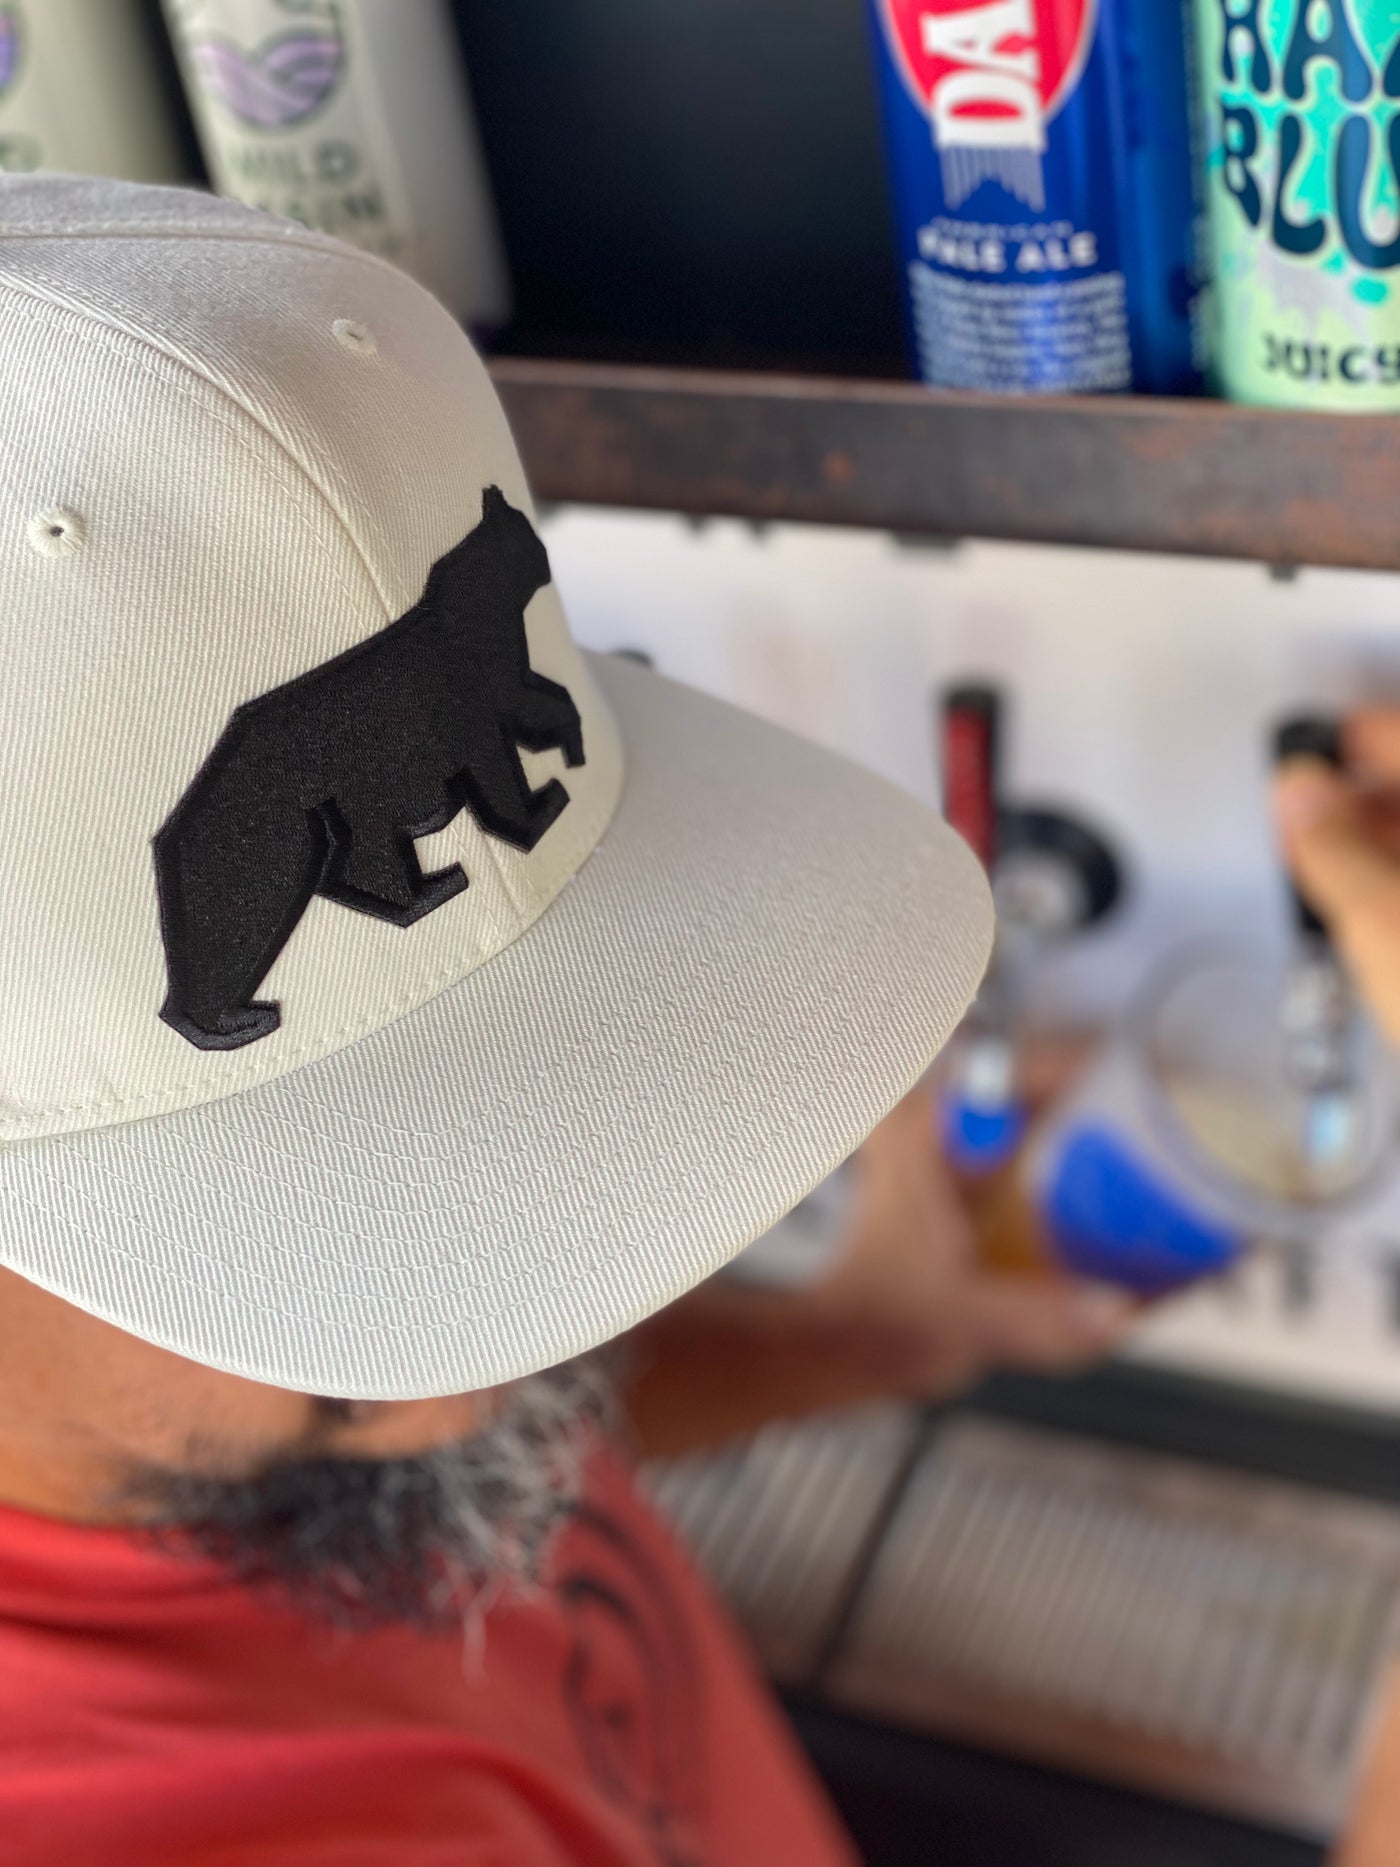 Solid White 6-Panel Flatbill Trucker Hat with Black Bear Patch